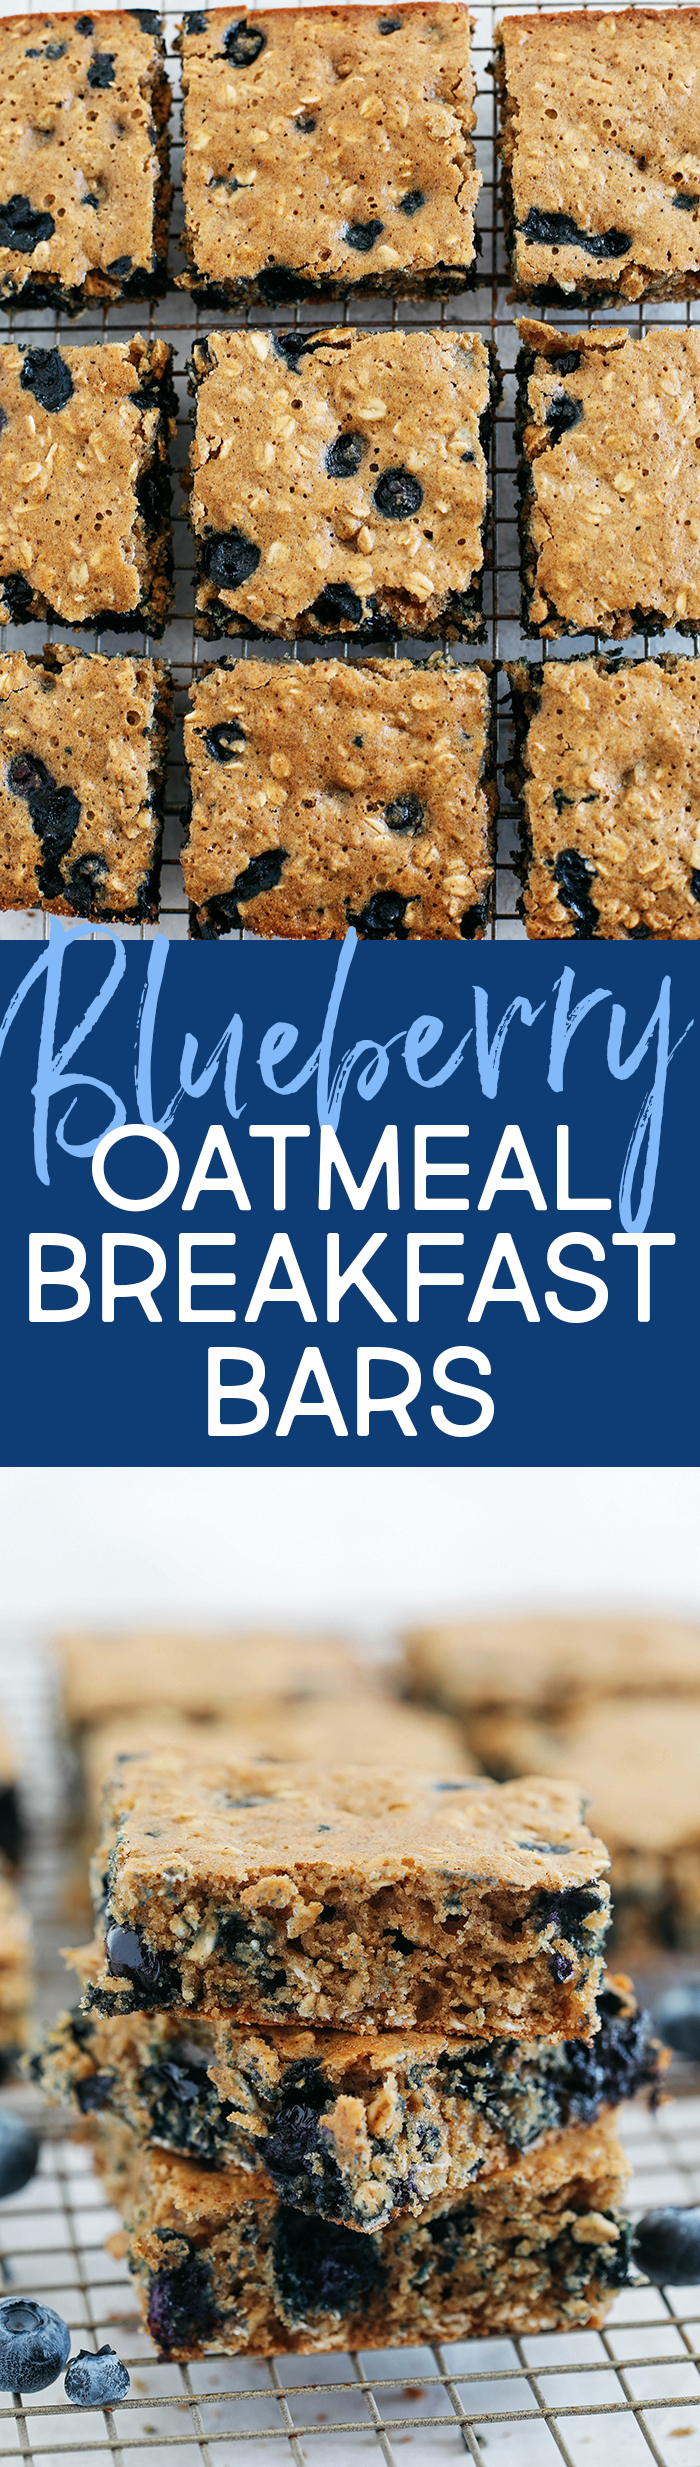 These delicious Blueberry Oatmeal Breakfast Bars make a quick on-the-go breakfast or snack option that are healthy, kid-friendly and super easy to throw together!